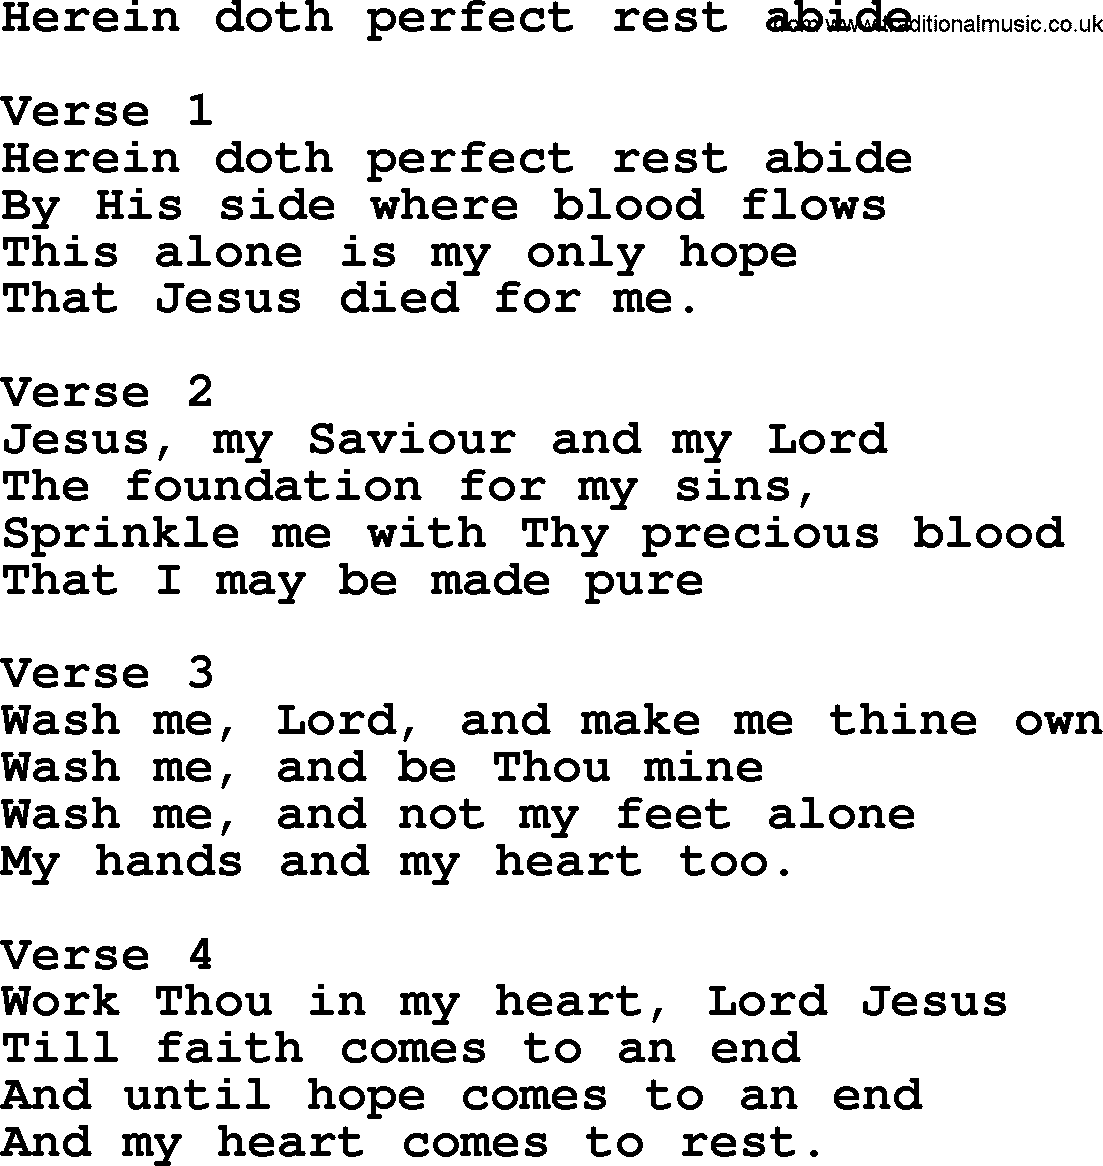 Apostolic and Pentecostal Hymns and Gospel Songs, Hymn: Herein Doth Perfect Rest Abide, Christian lyrics and PDF